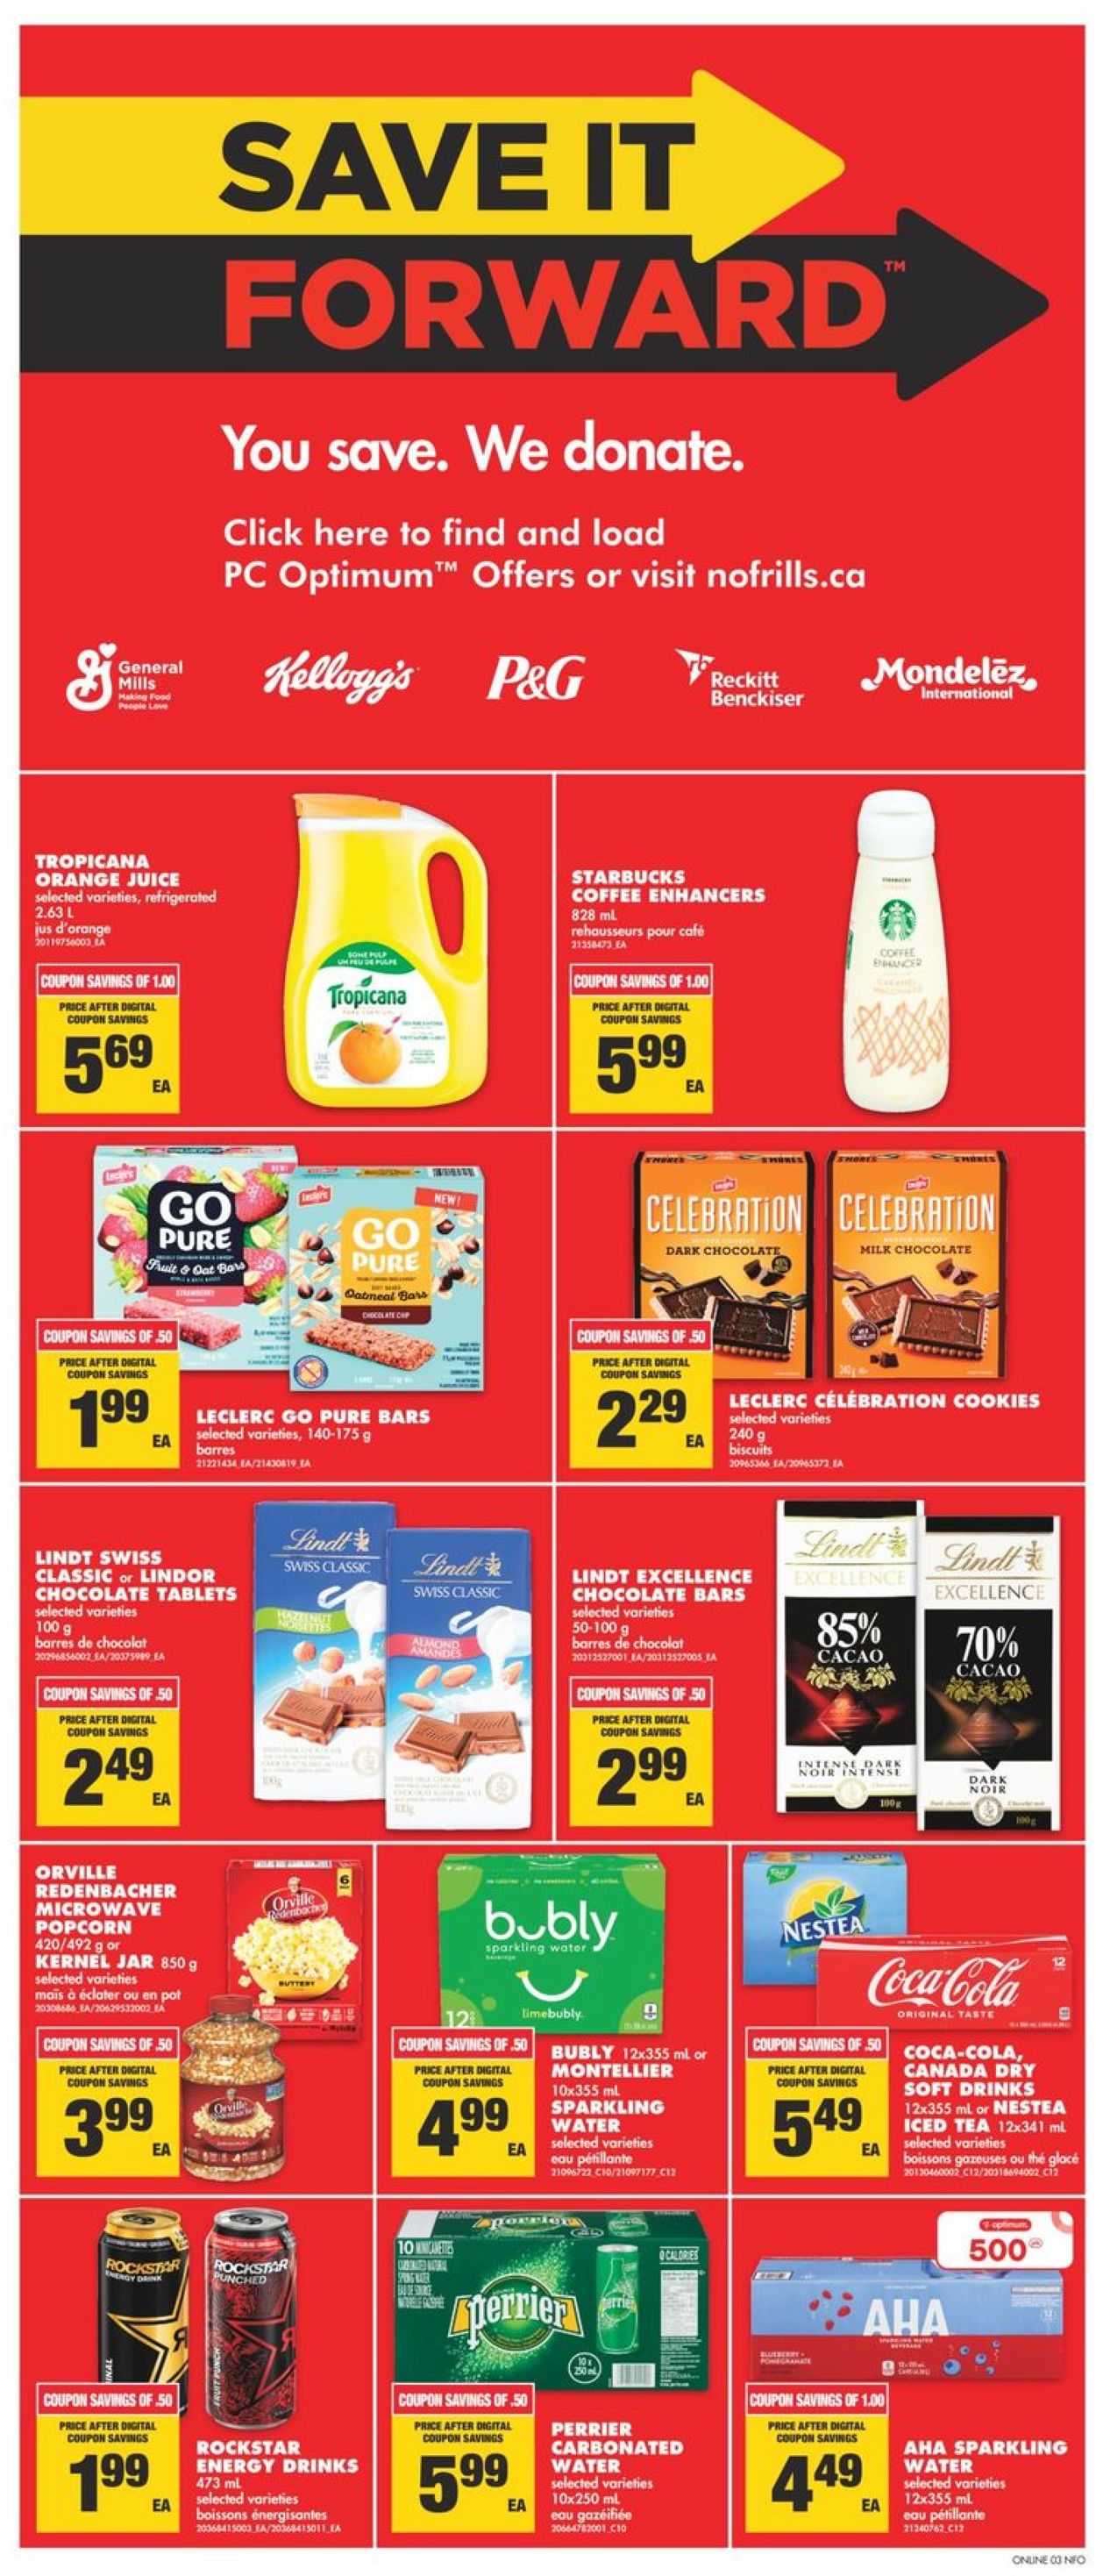 No Frills Flyer from 05/19/2022